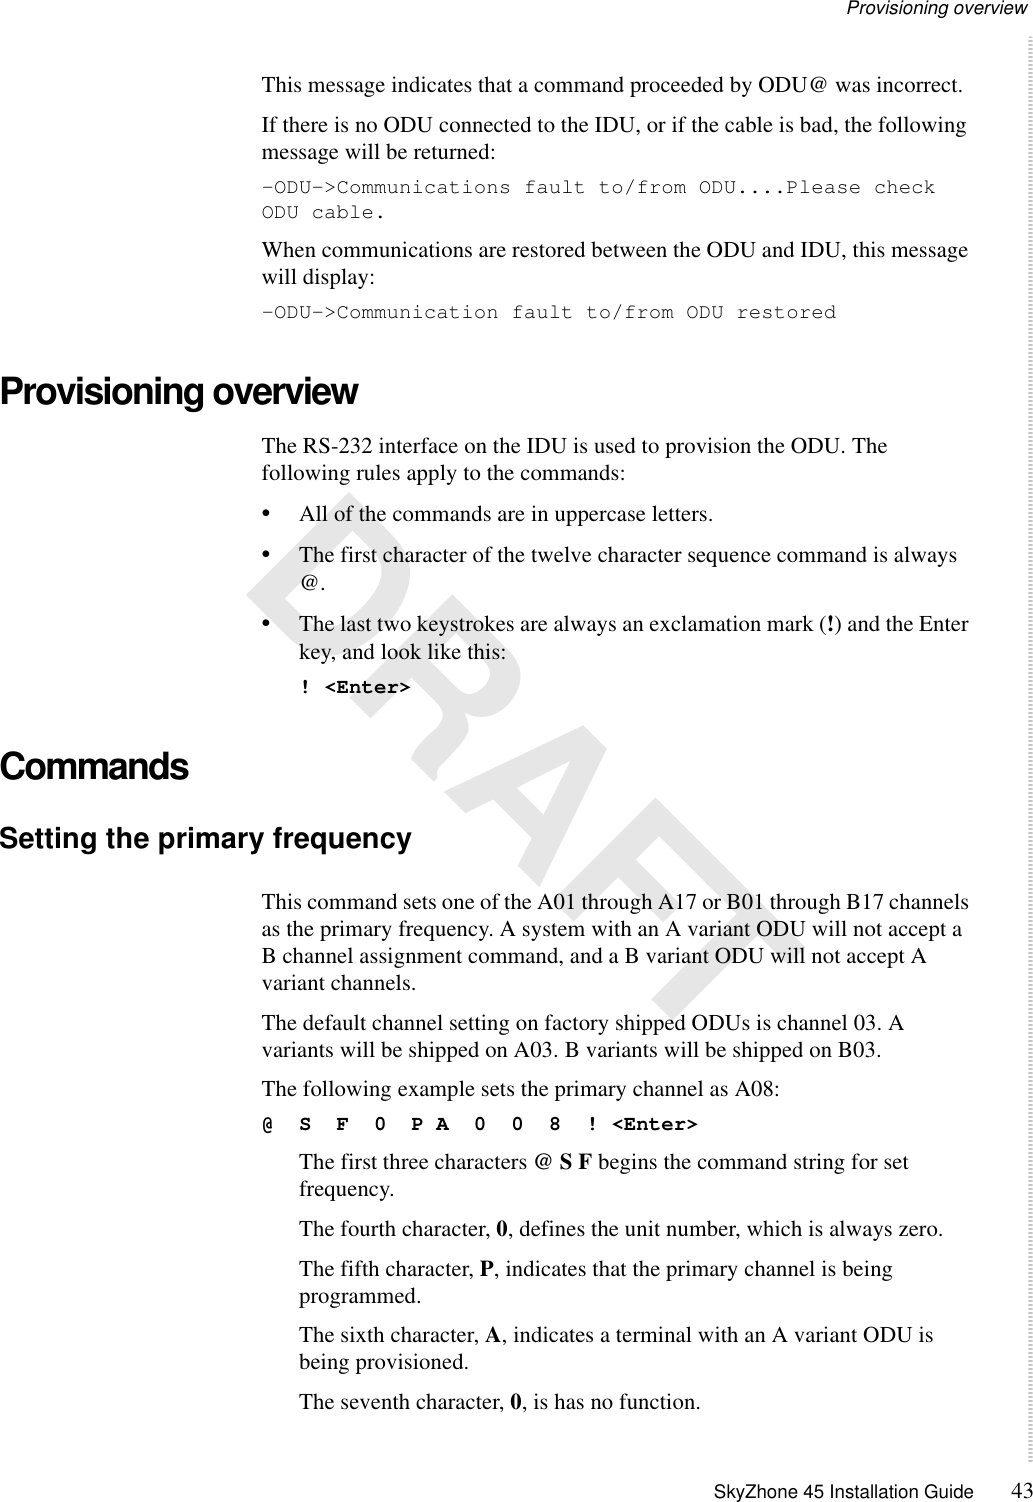 Provisioning overview SkyZhone 45 Installation Guide 43 DRAFTThis message indicates that a command proceeded by ODU@ was incorrect.If there is no ODU connected to the IDU, or if the cable is bad, the following message will be returned:-ODU-&gt;Communications fault to/from ODU....Please check ODU cable.When communications are restored between the ODU and IDU, this message will display:-ODU-&gt;Communication fault to/from ODU restoredProvisioning overviewThe RS-232 interface on the IDU is used to provision the ODU. The following rules apply to the commands:•All of the commands are in uppercase letters.•The first character of the twelve character sequence command is always @. •The last two keystrokes are always an exclamation mark (!) and the Enter key, and look like this: ! &lt;Enter&gt;CommandsSetting the primary frequency This command sets one of the A01 through A17 or B01 through B17 channels as the primary frequency. A system with an A variant ODU will not accept a B channel assignment command, and a B variant ODU will not accept A variant channels.The default channel setting on factory shipped ODUs is channel 03. A variants will be shipped on A03. B variants will be shipped on B03.The following example sets the primary channel as A08:@  S  F  0  P A  0  0  8  ! &lt;Enter&gt;The first three characters @ S F begins the command string for set frequency.The fourth character, 0, defines the unit number, which is always zero.The fifth character, P, indicates that the primary channel is being programmed.The sixth character, A, indicates a terminal with an A variant ODU is being provisioned.The seventh character, 0, is has no function.